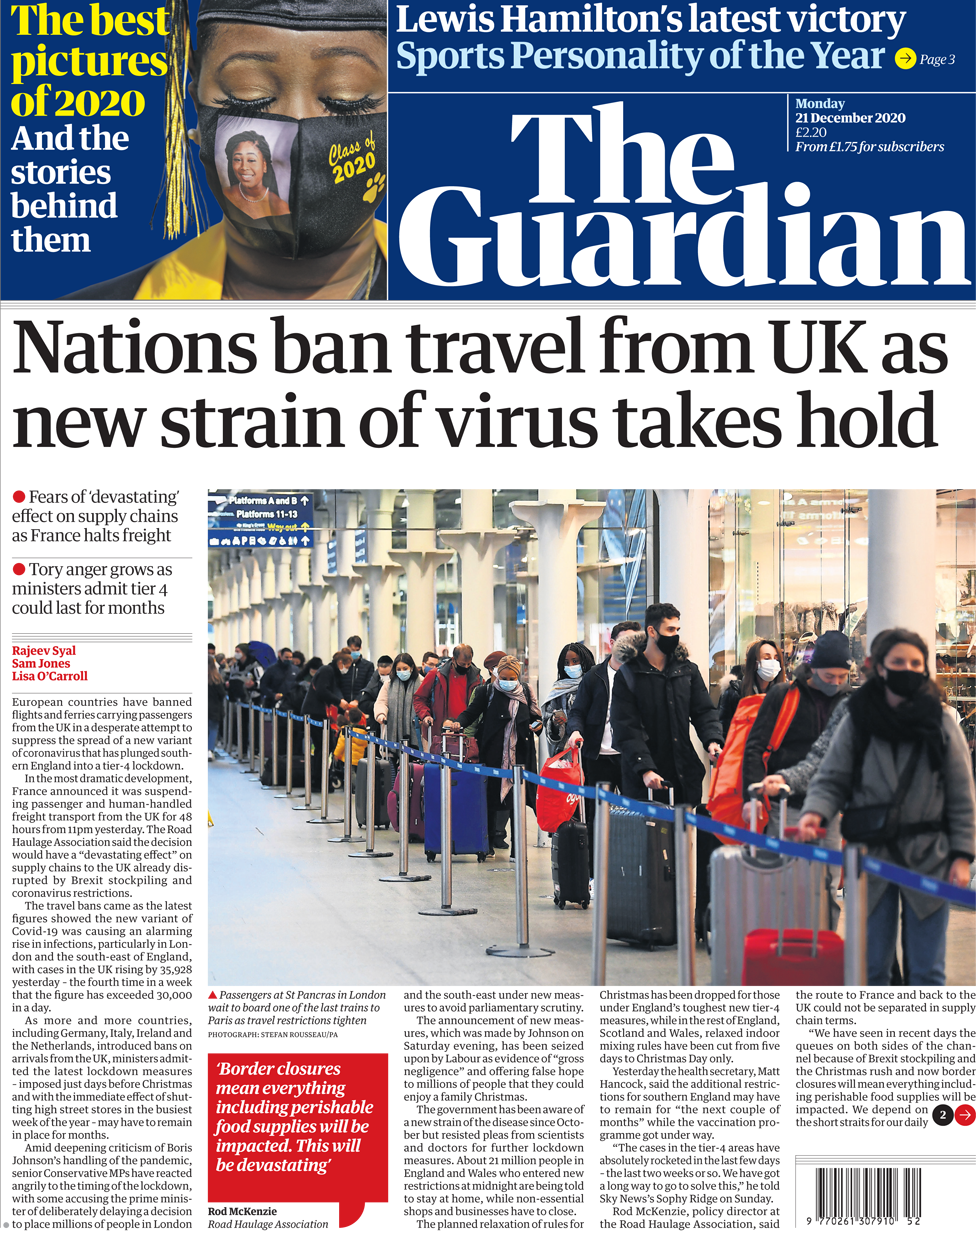 The Guardian front page 21 December 2020